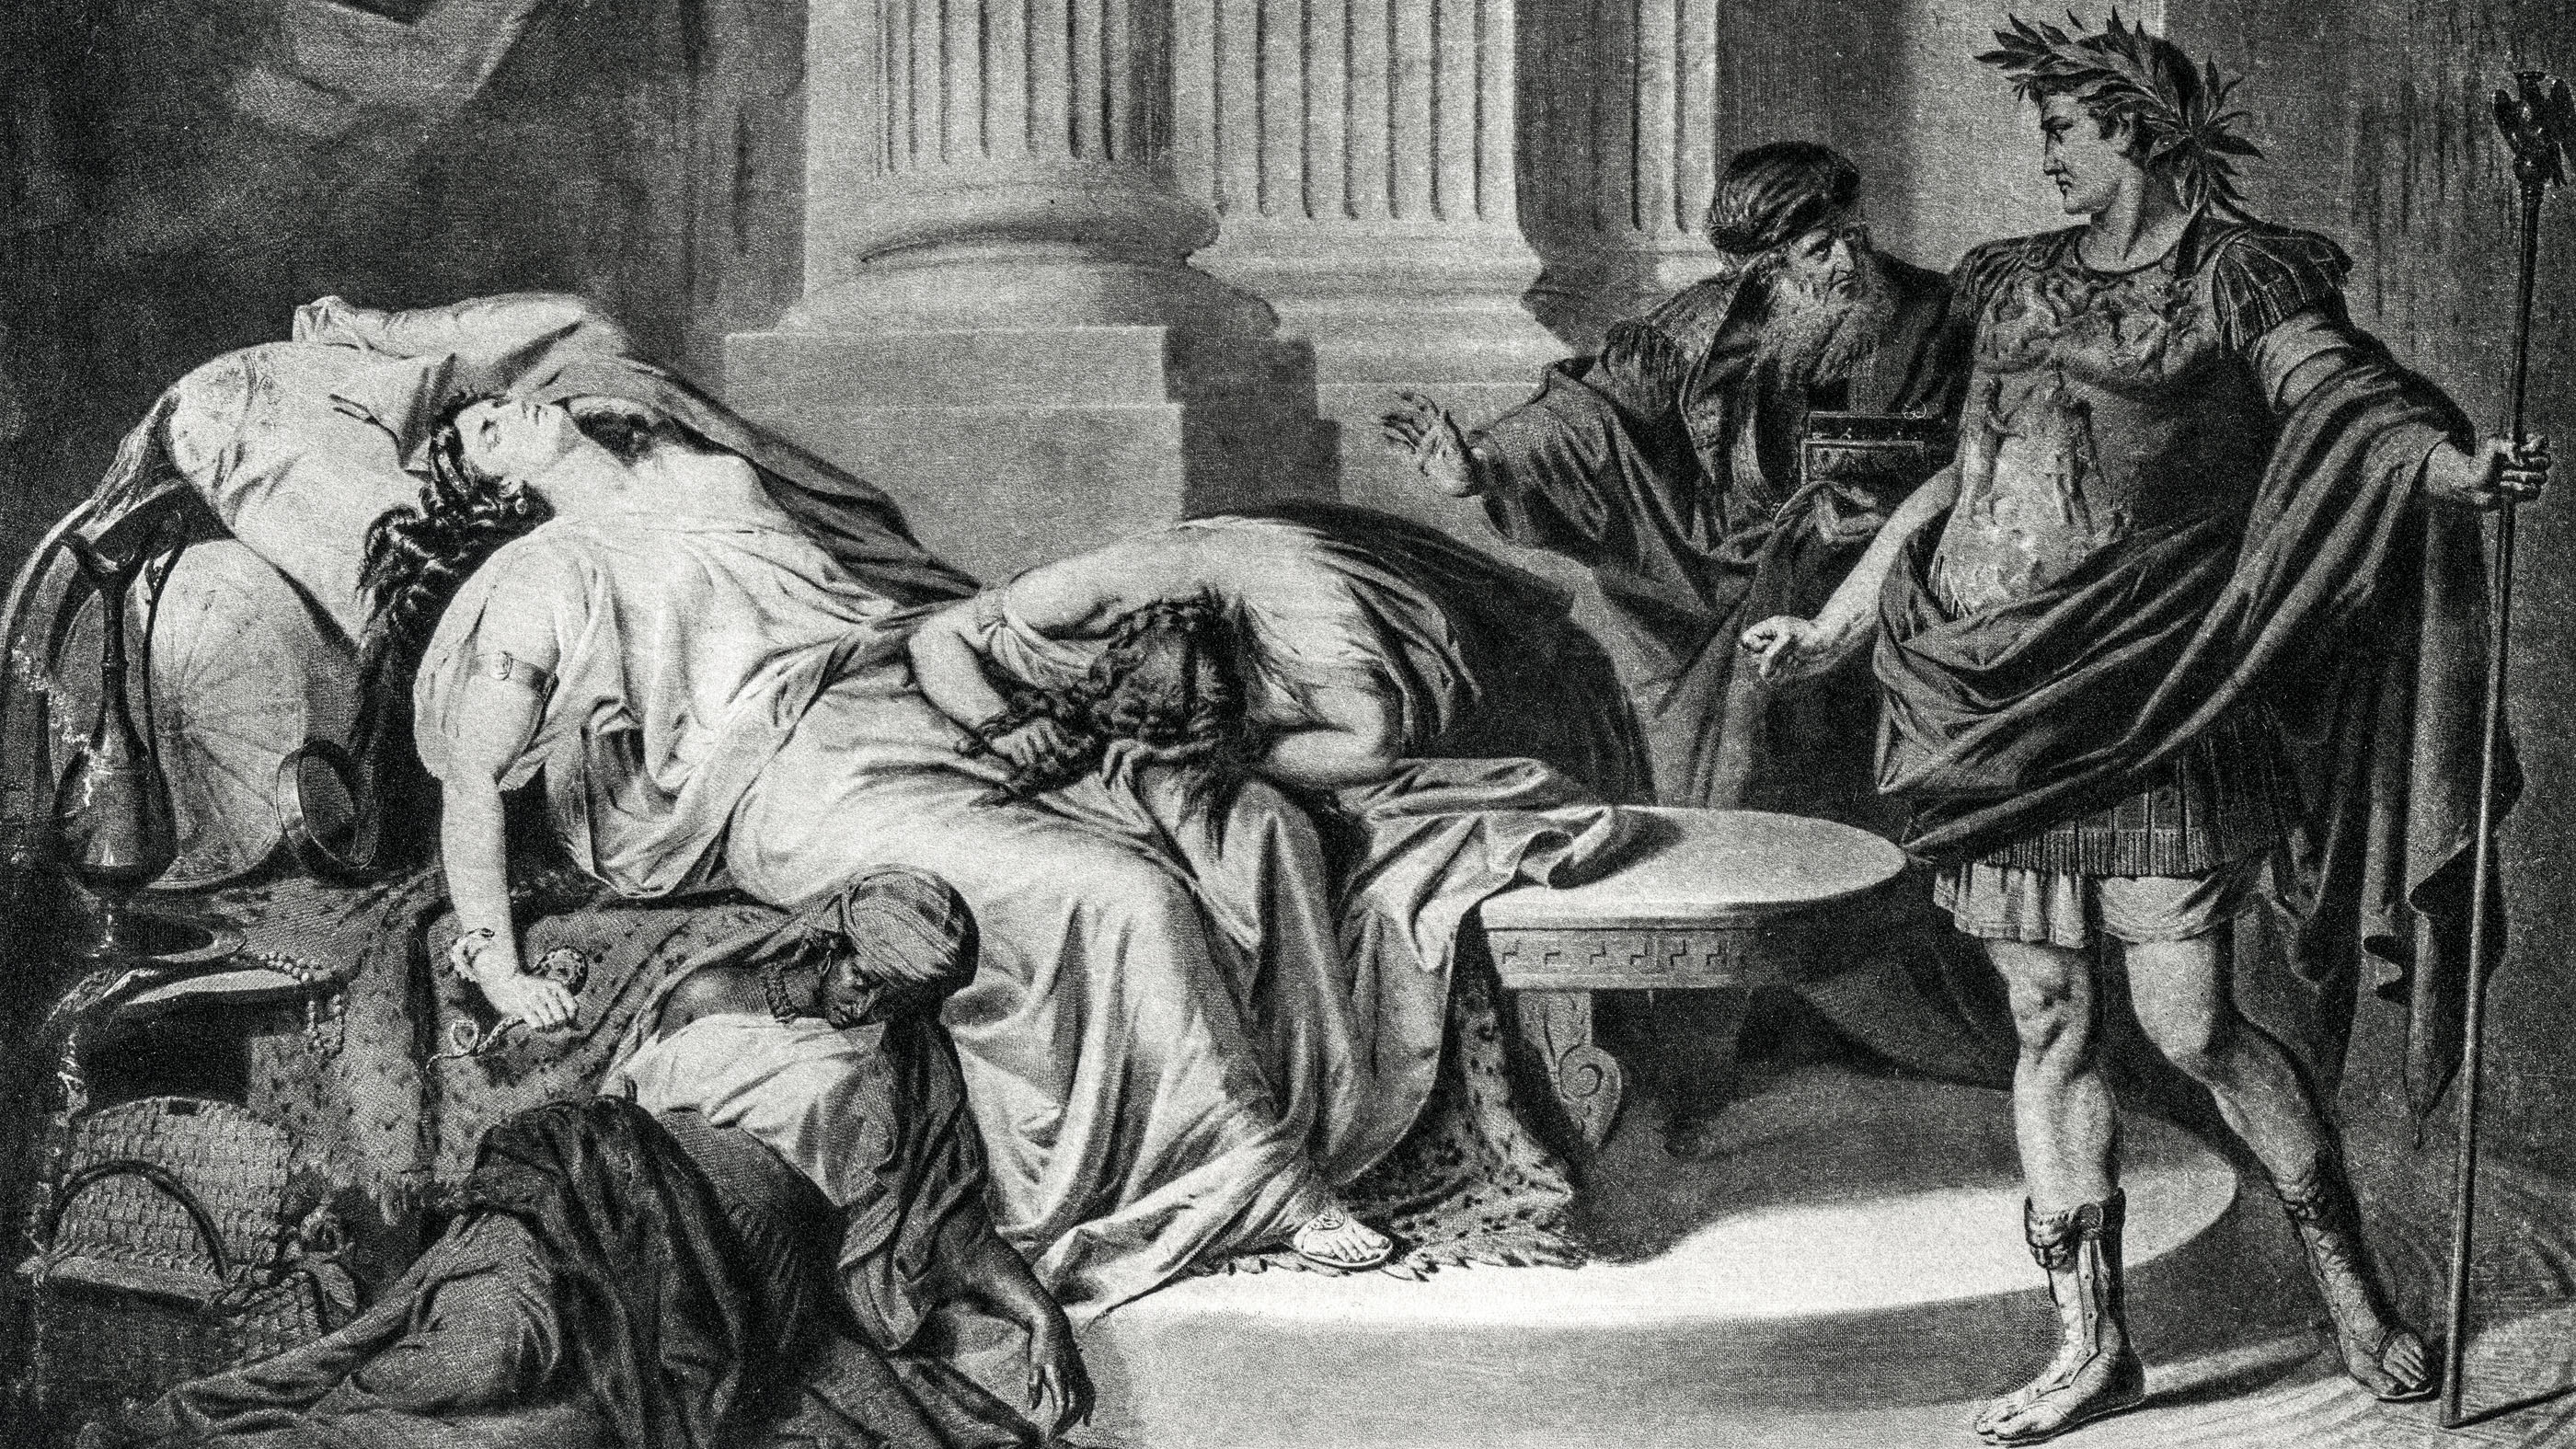 This engraving from 1894 shows Augustus Caesar and Cleopatra — who is dead with a snake in her hand.